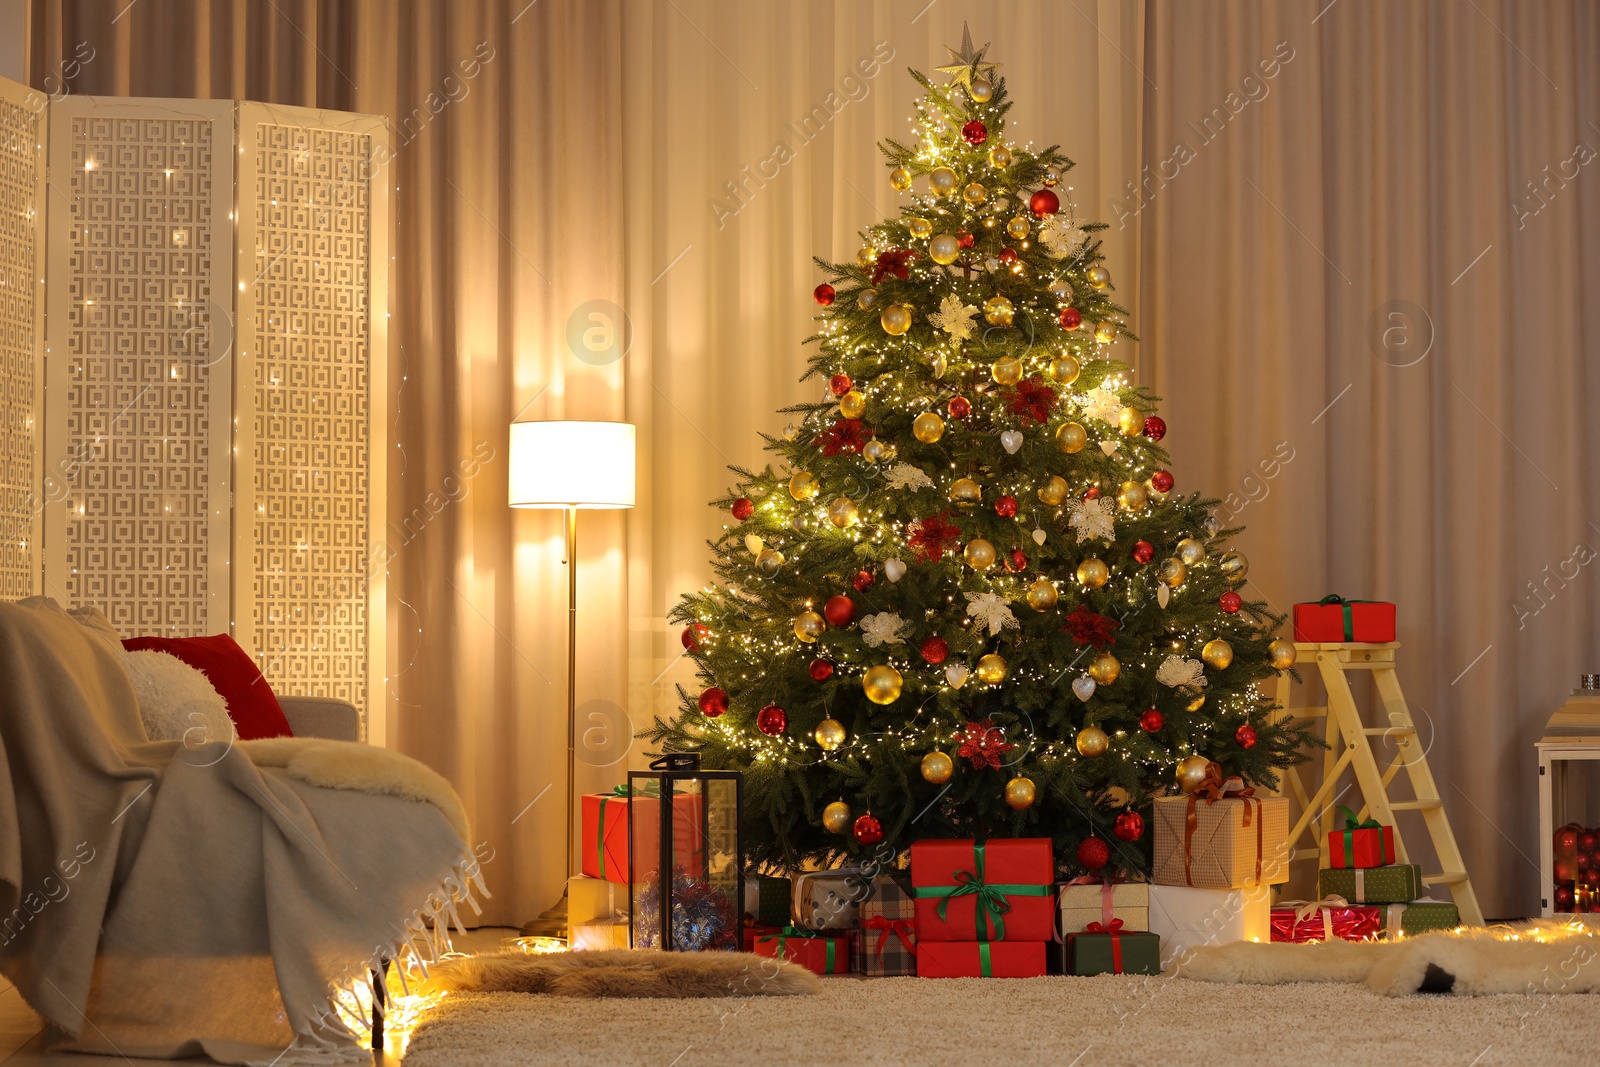 Photo of Beautifully wrapped gifts under Christmas tree in living room. Festive interior design